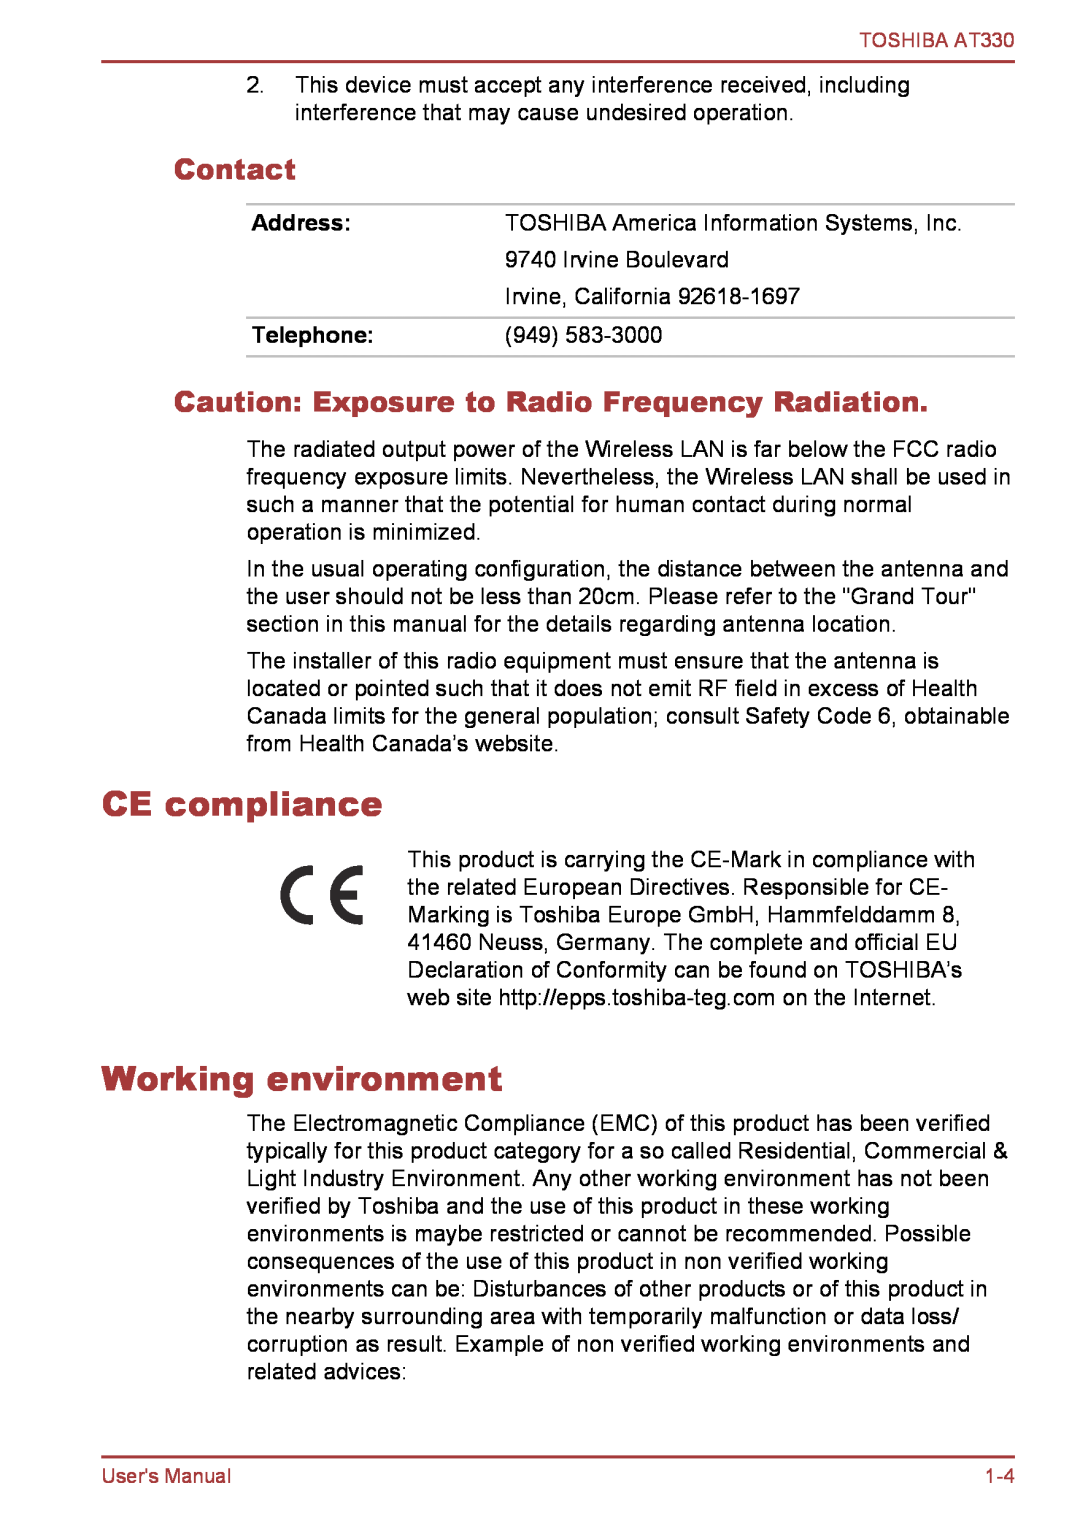 Toshiba at330 CE compliance, Working environment, Contact, Caution Exposure to Radio Frequency Radiation, Address 